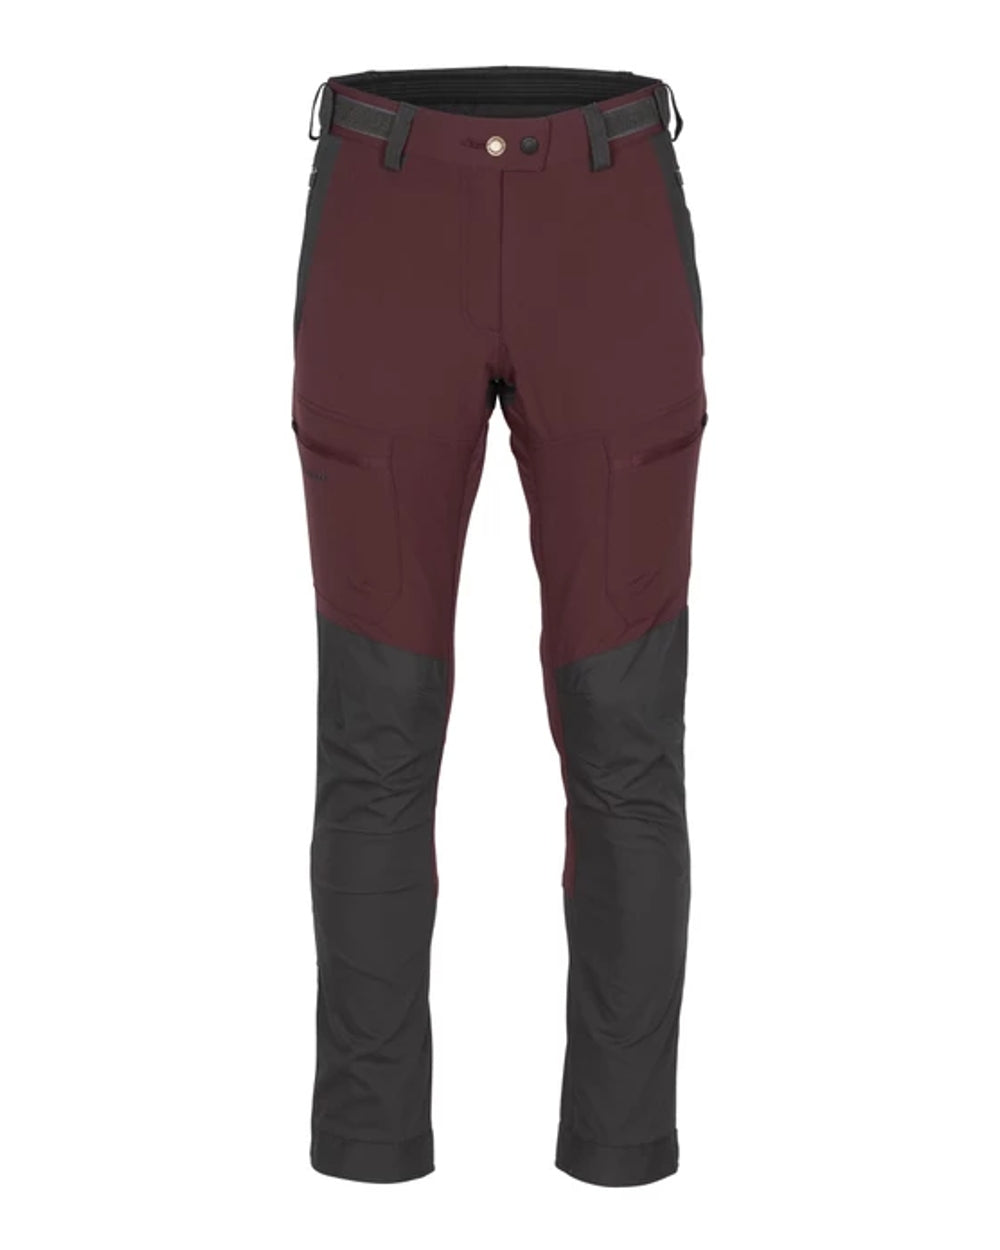 Pinewood Womens Finnveden Hybrid Extreme Trousers in Earth Plum/Dark Anthracite